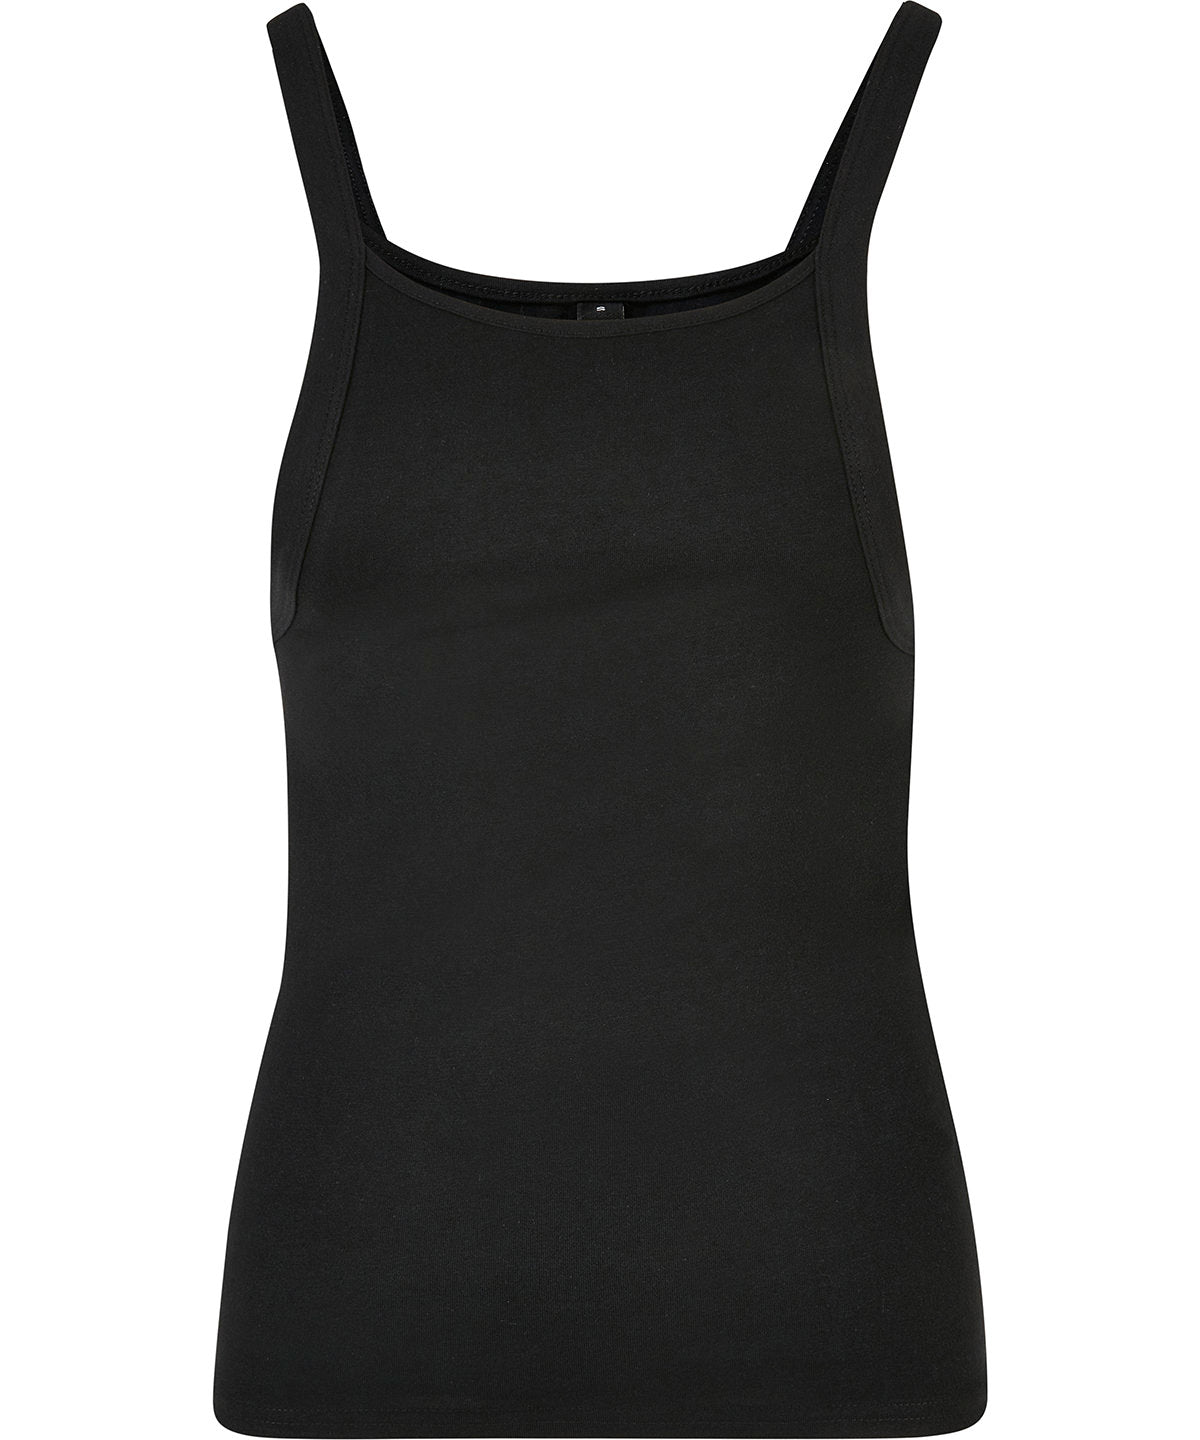 Personalised Vests - Black Build Your Brand Women’s everyday tank top